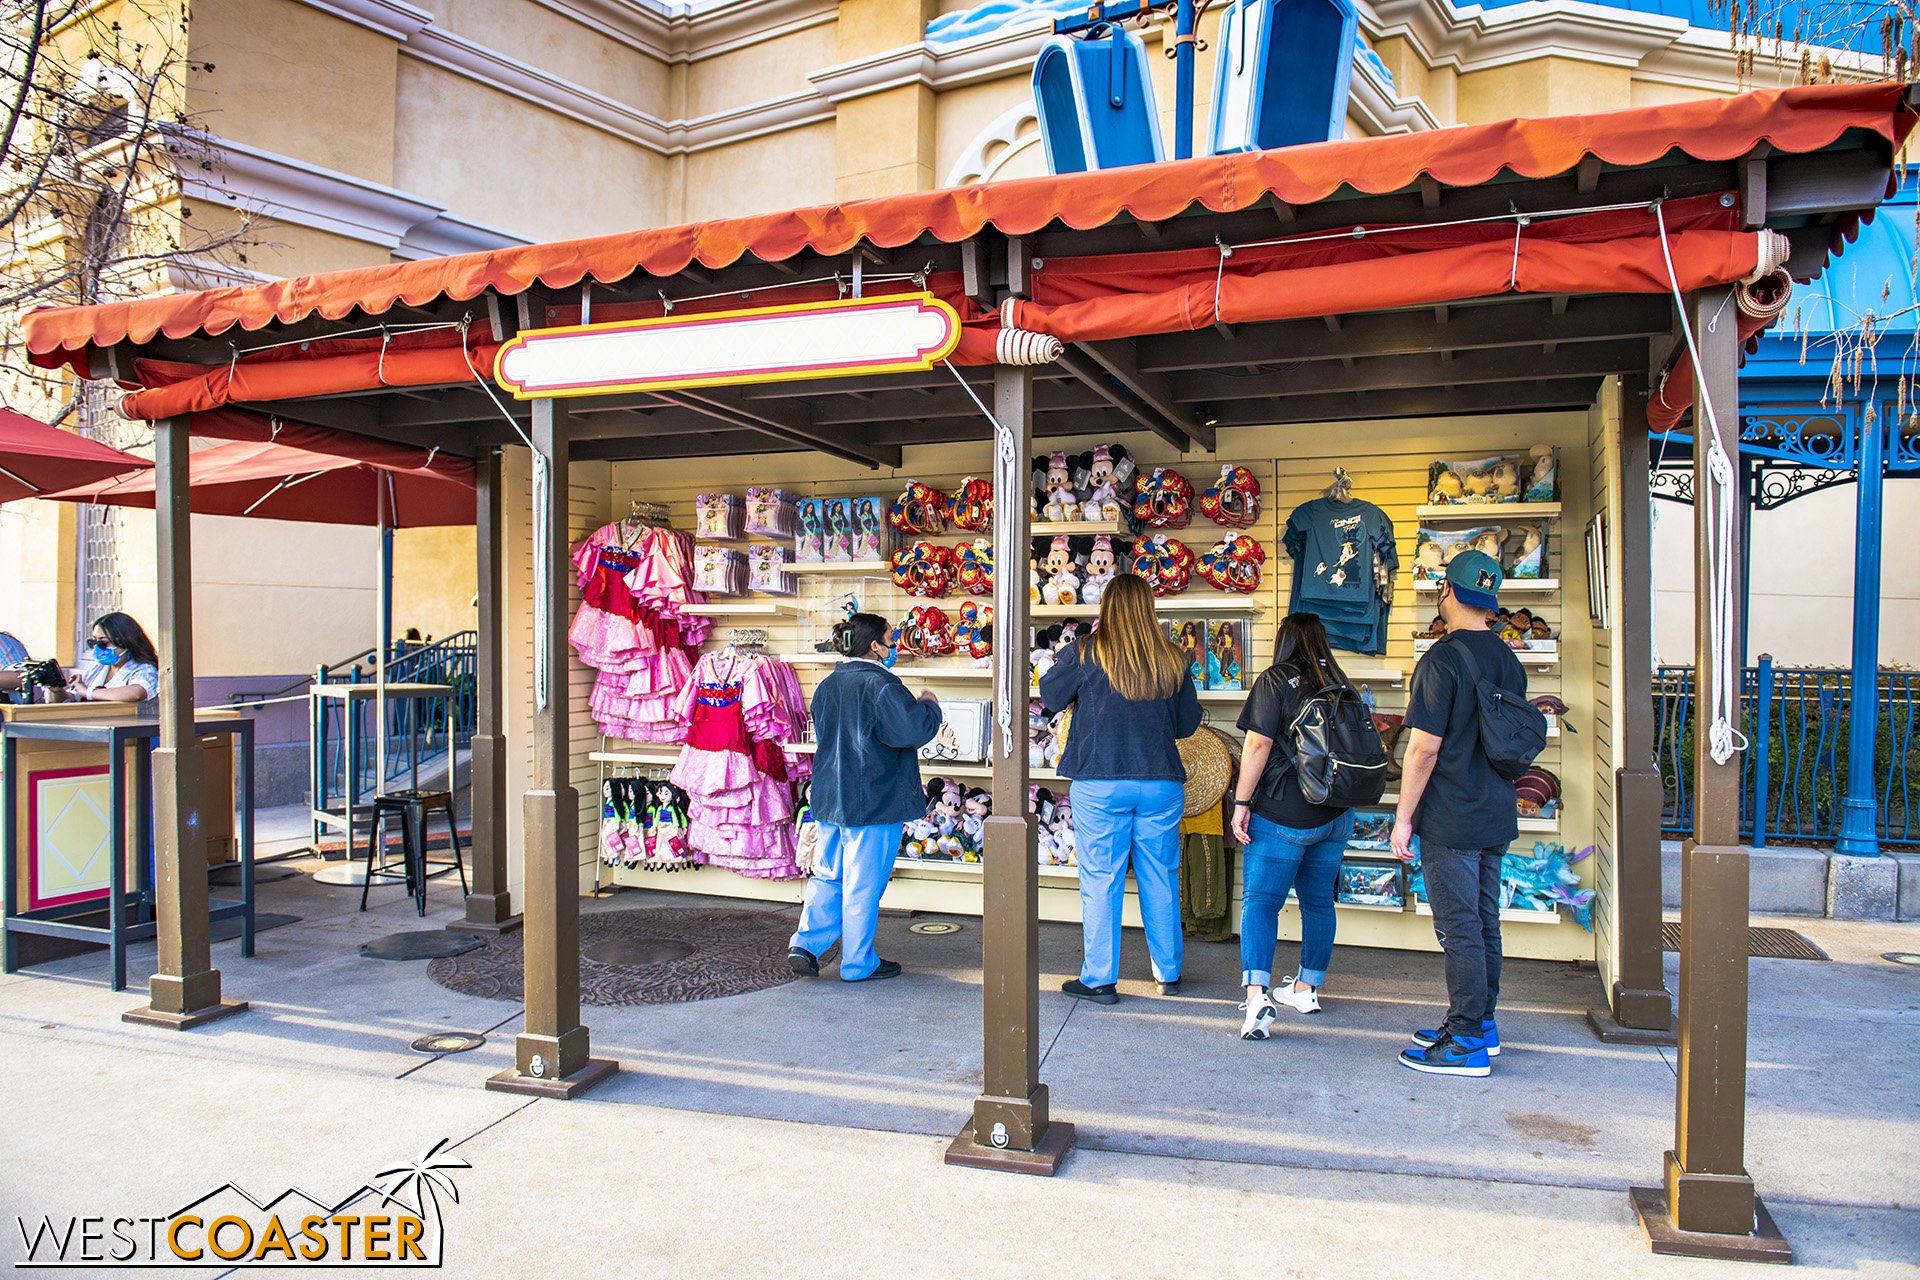  The souvenir stand is also still running out the Lunar New Year Celebration items this week until the Food and Wine merchandise comes at the end of the week. 